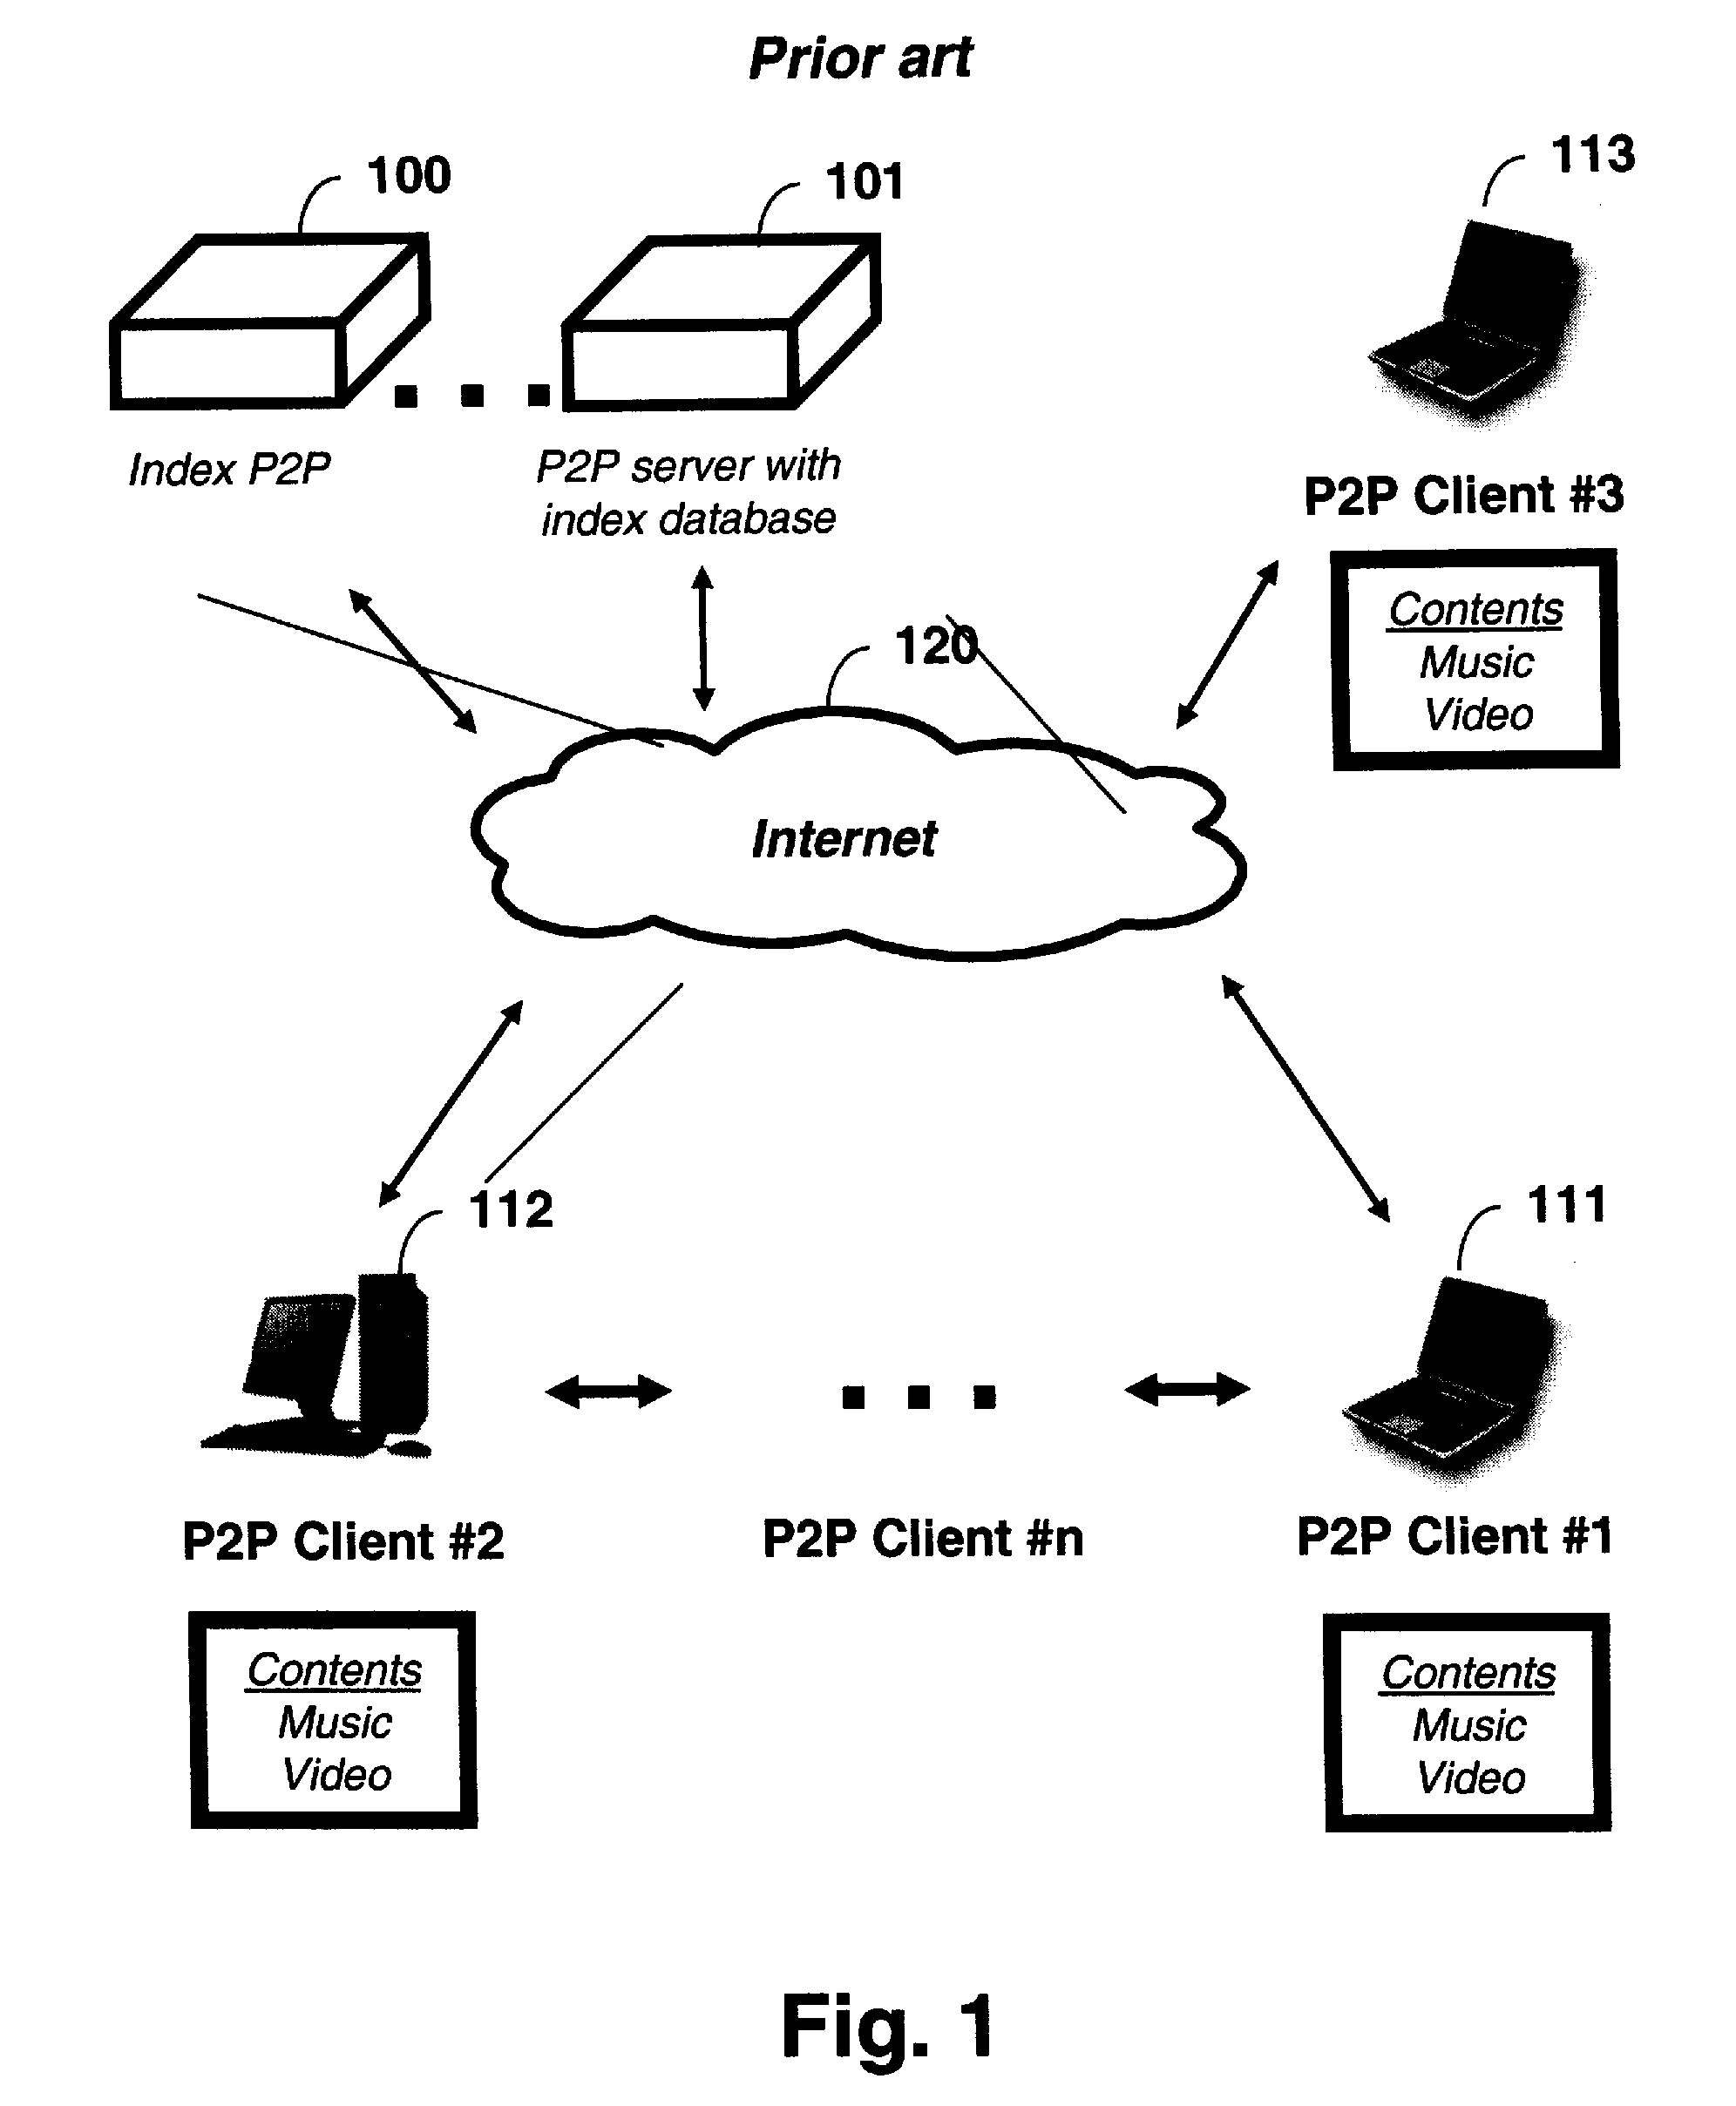 Method and System of Administrating a Peer-to-Peer File Sharing Network